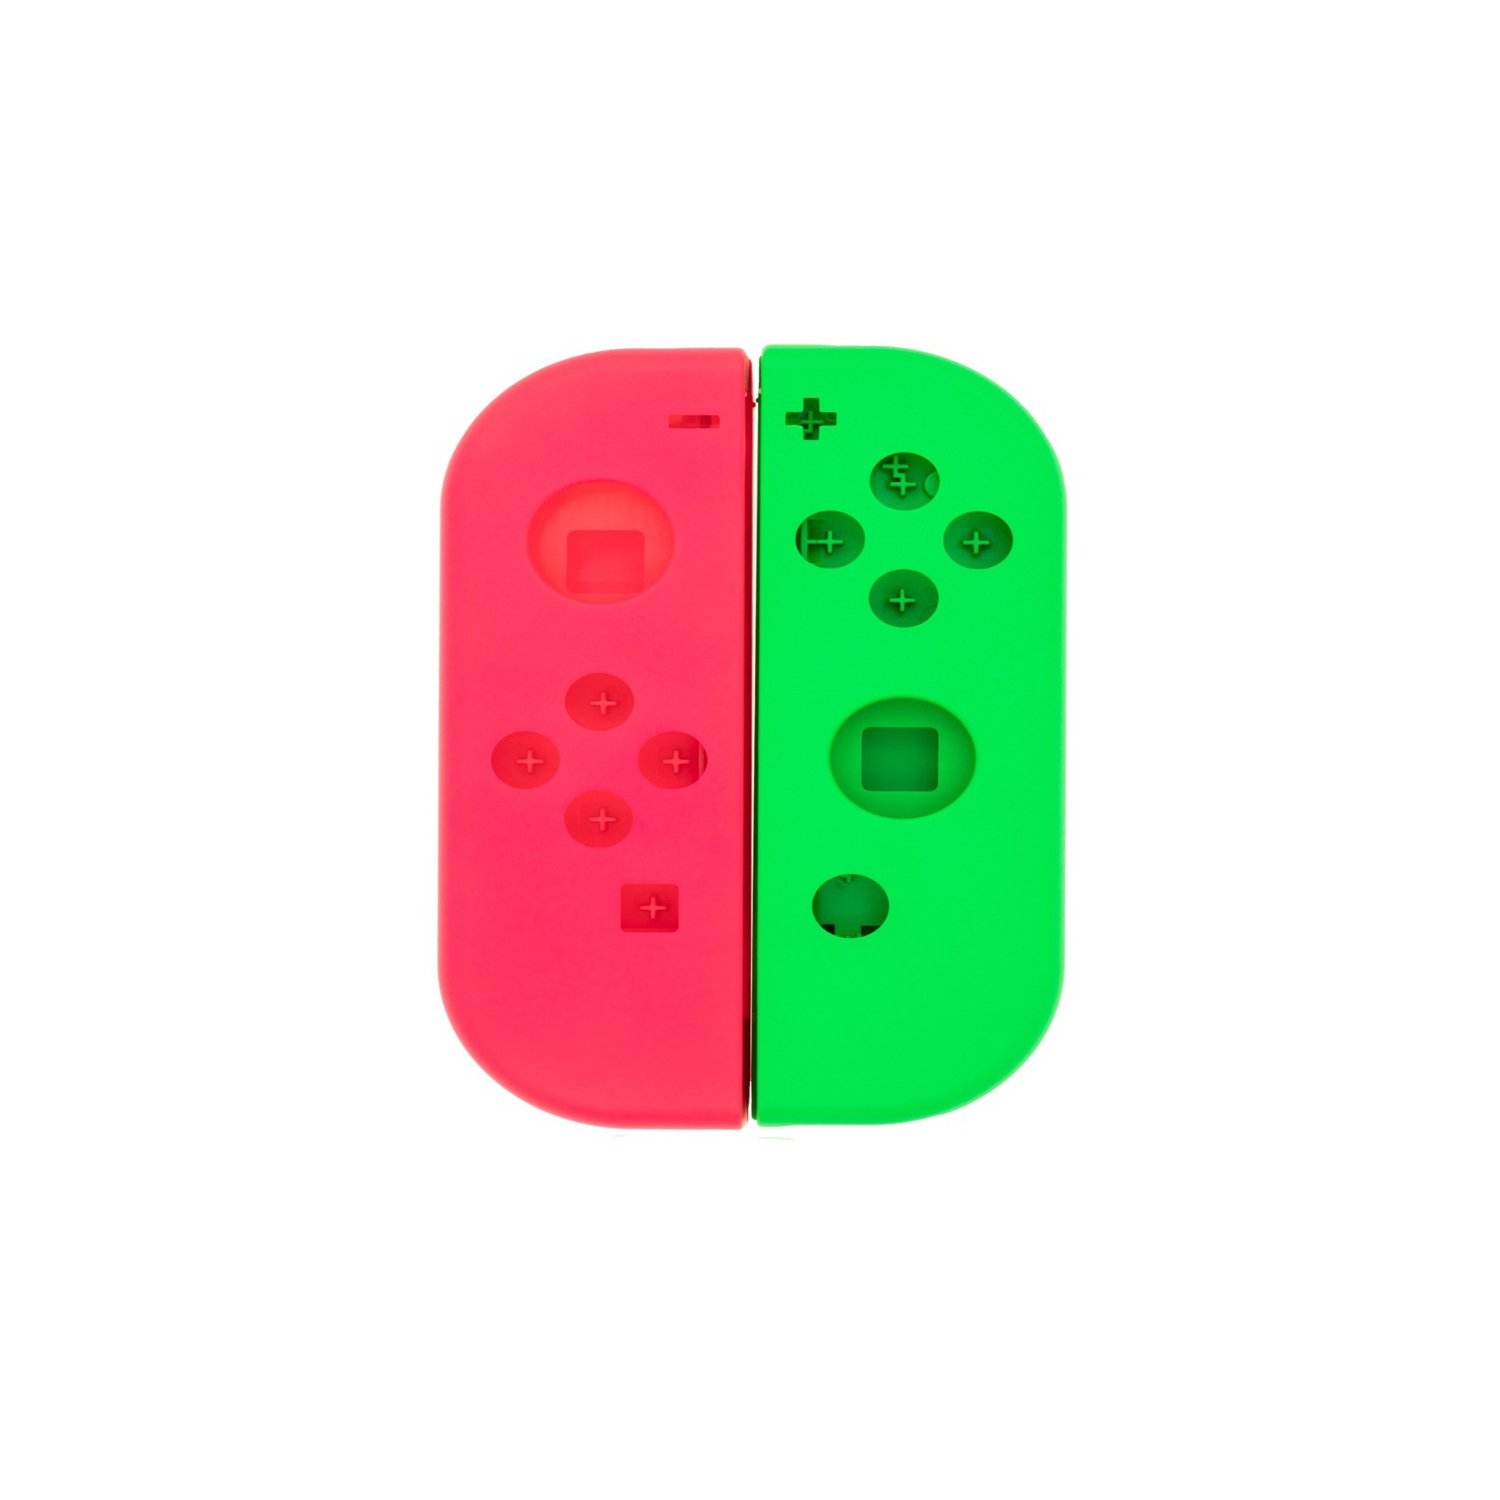 Replacement Housing Shell Case For Nintendo Switch Joy Con Controller - Red / Green